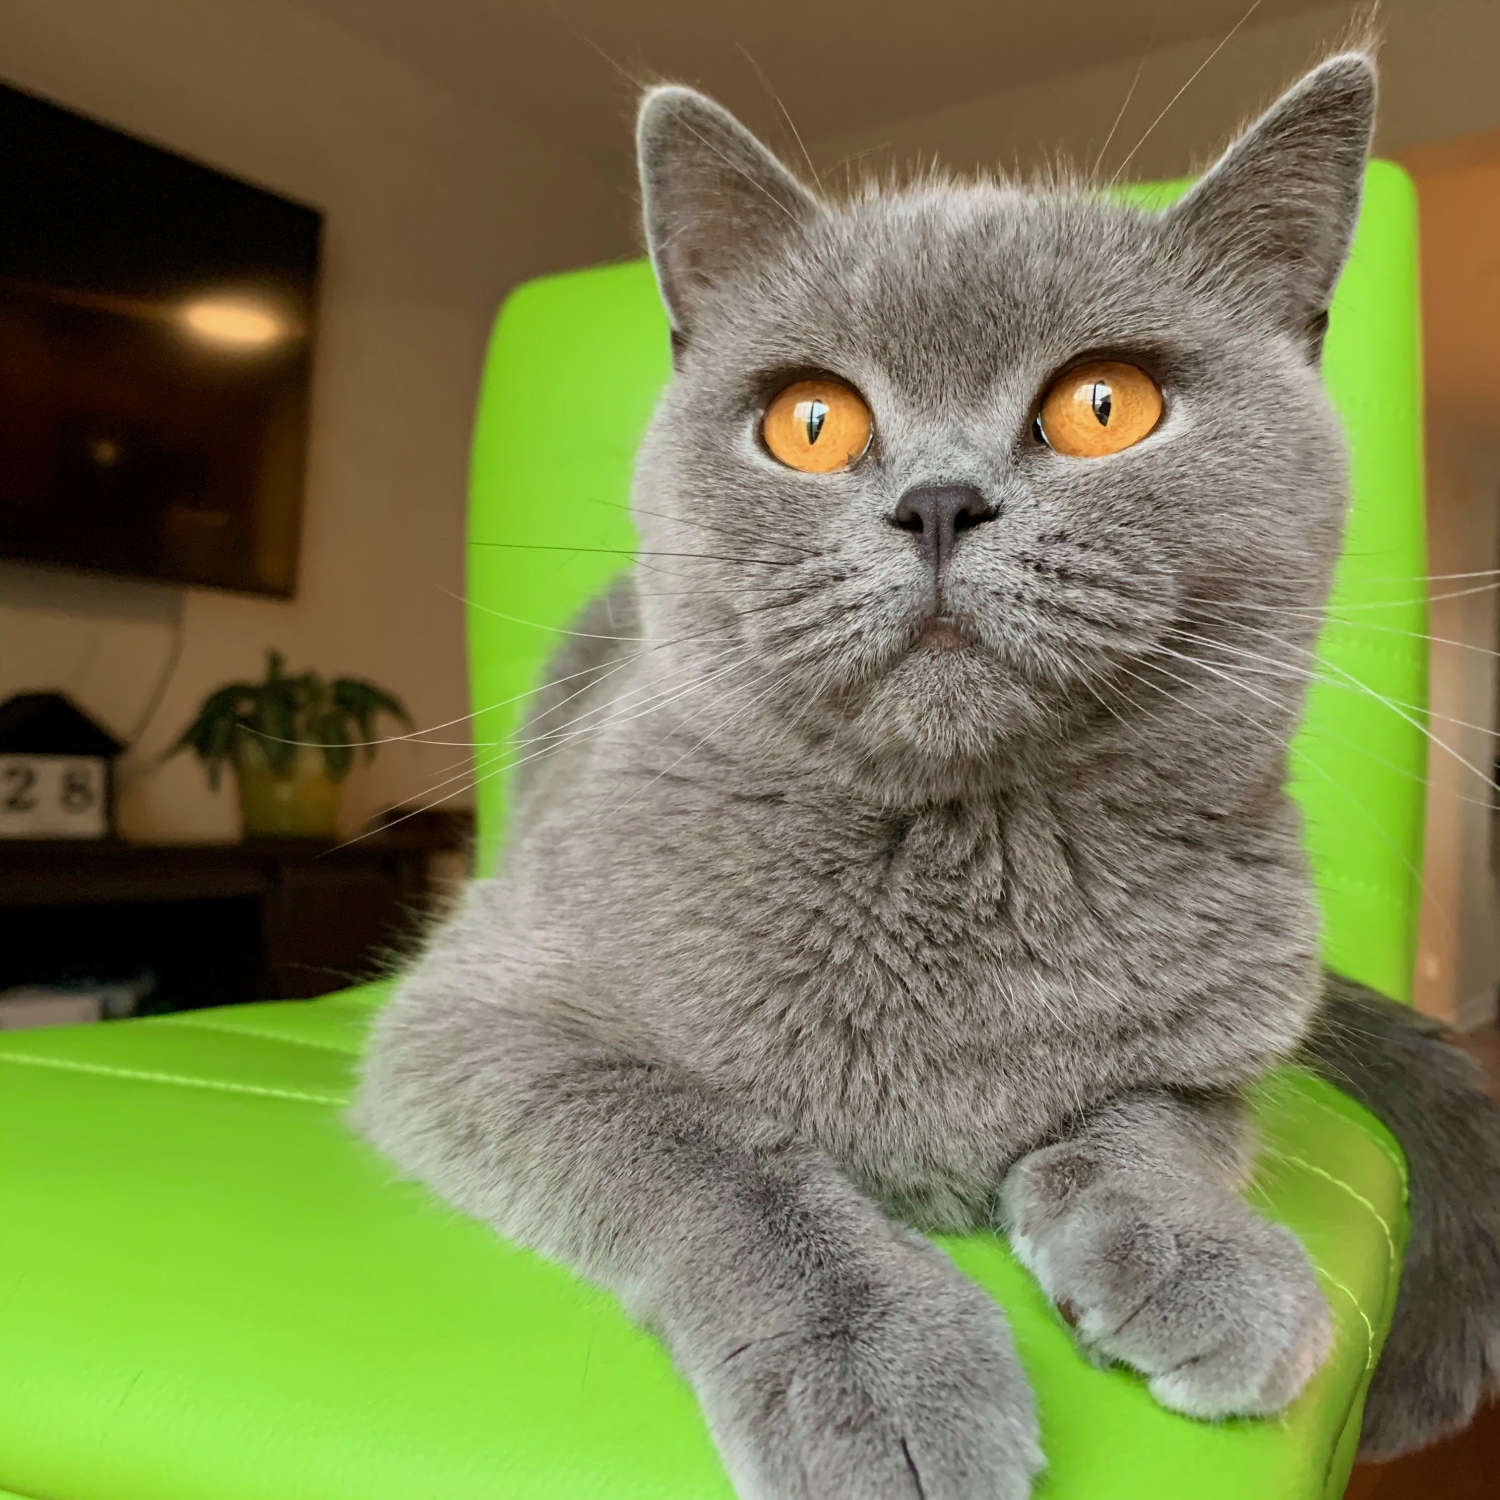 Cat on Green Chair